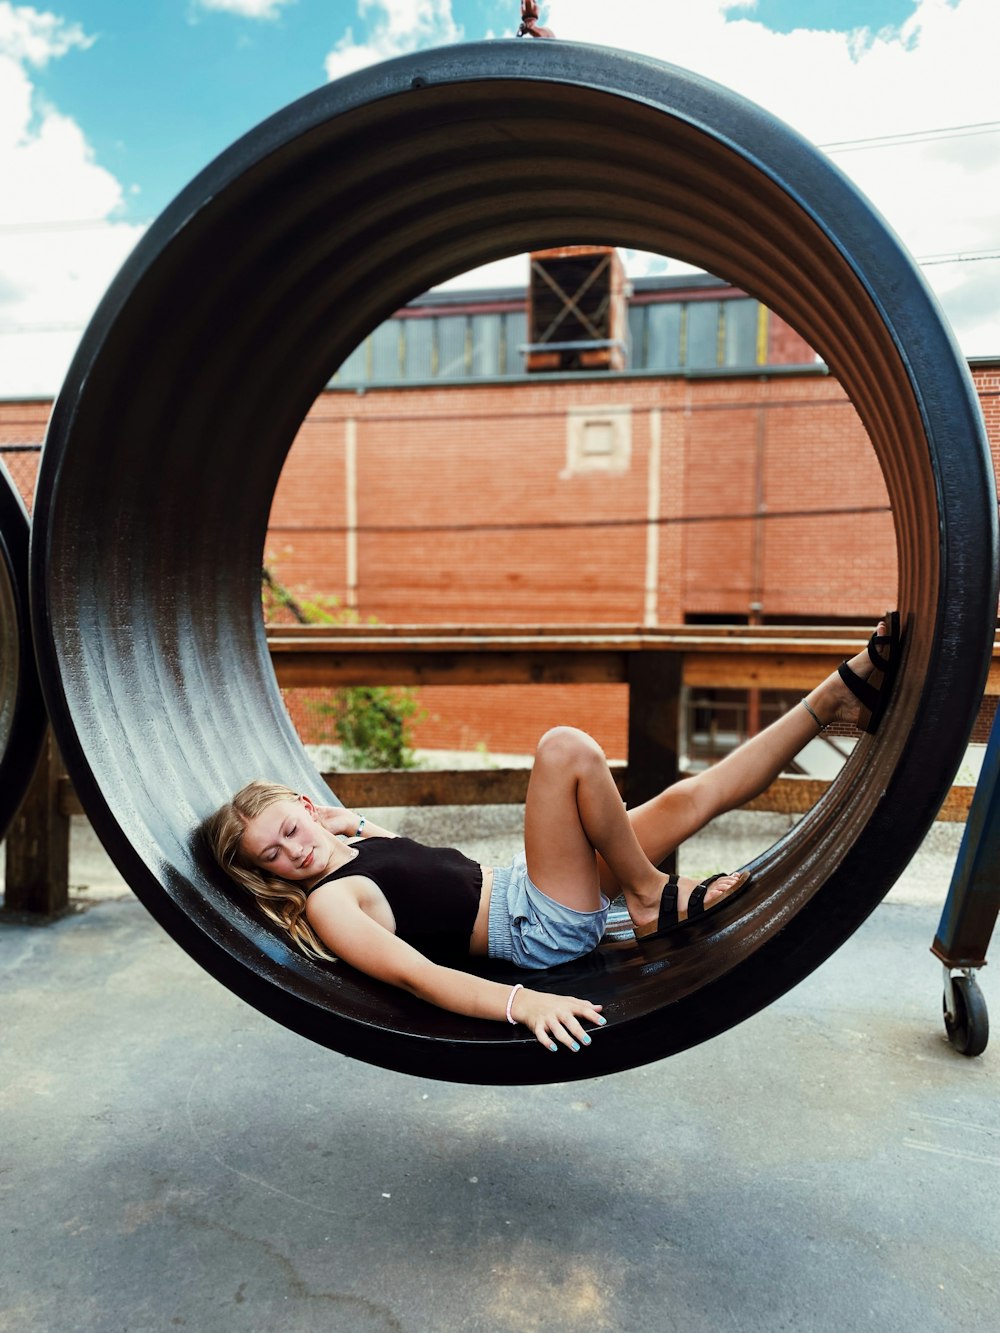 a person lying on a circular object